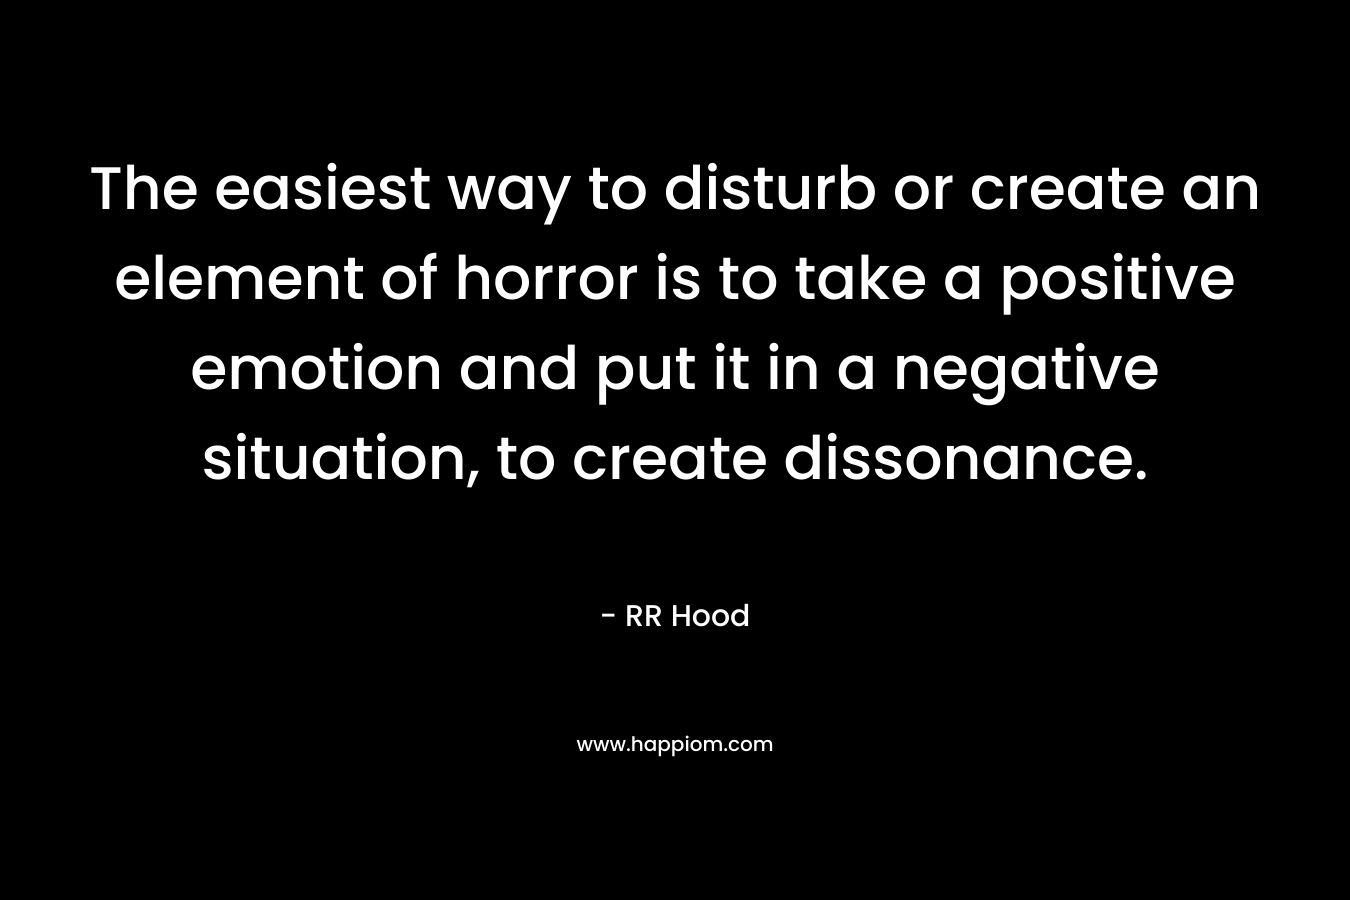 The easiest way to disturb or create an element of horror is to take a positive emotion and put it in a negative situation, to create dissonance.